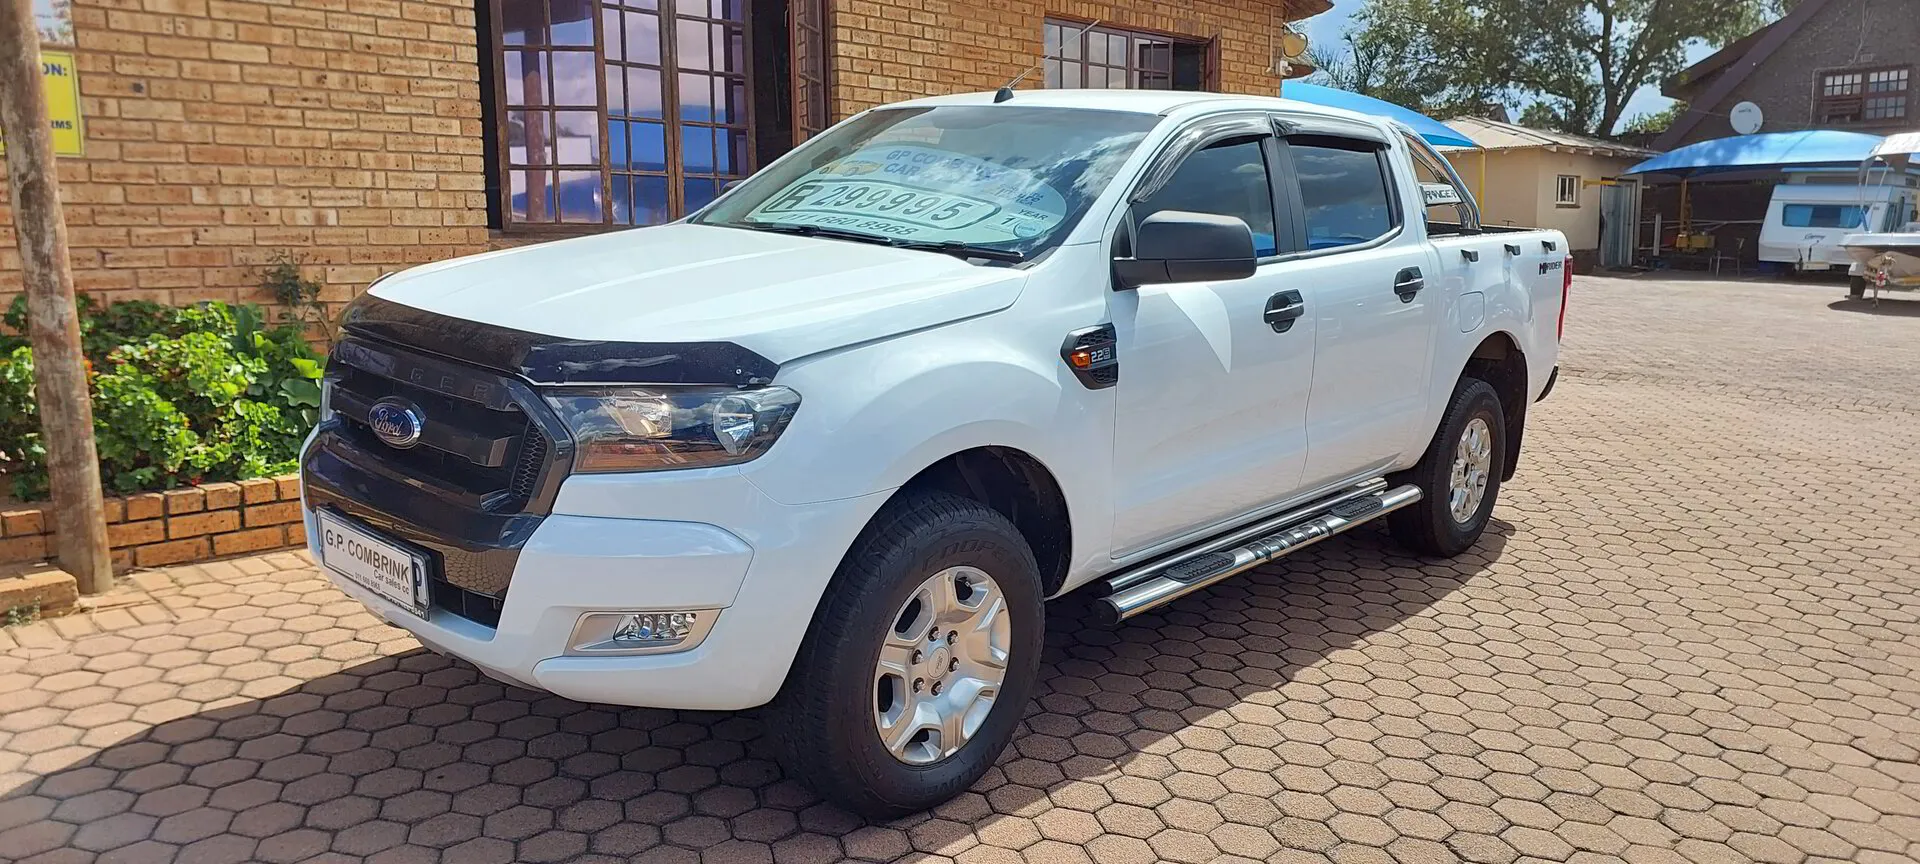 2018 Ford Ranger 2.2 Double cab (149 938km)